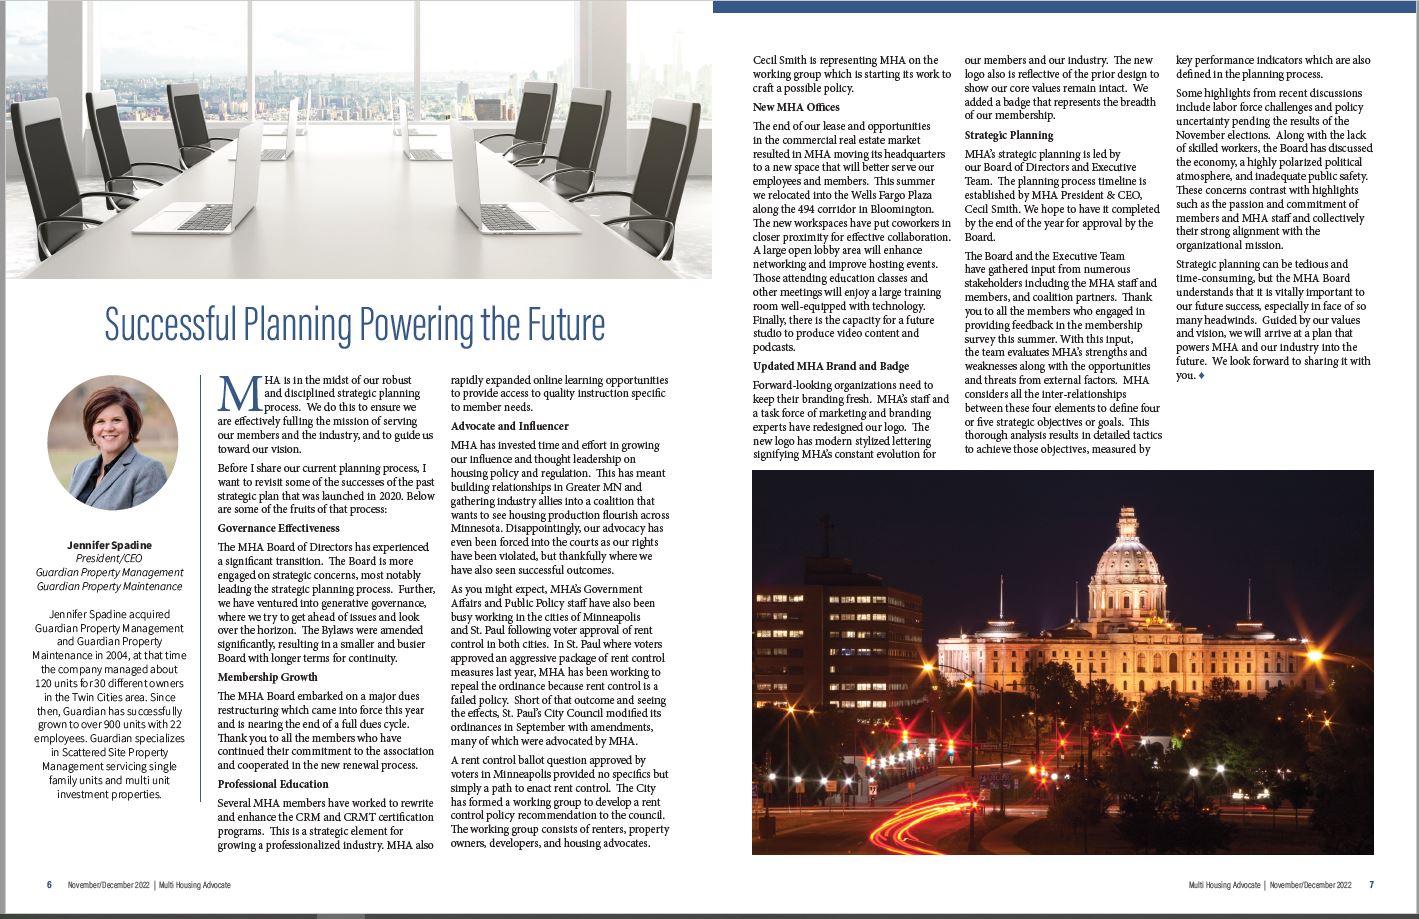 Successful Planning Powering the future